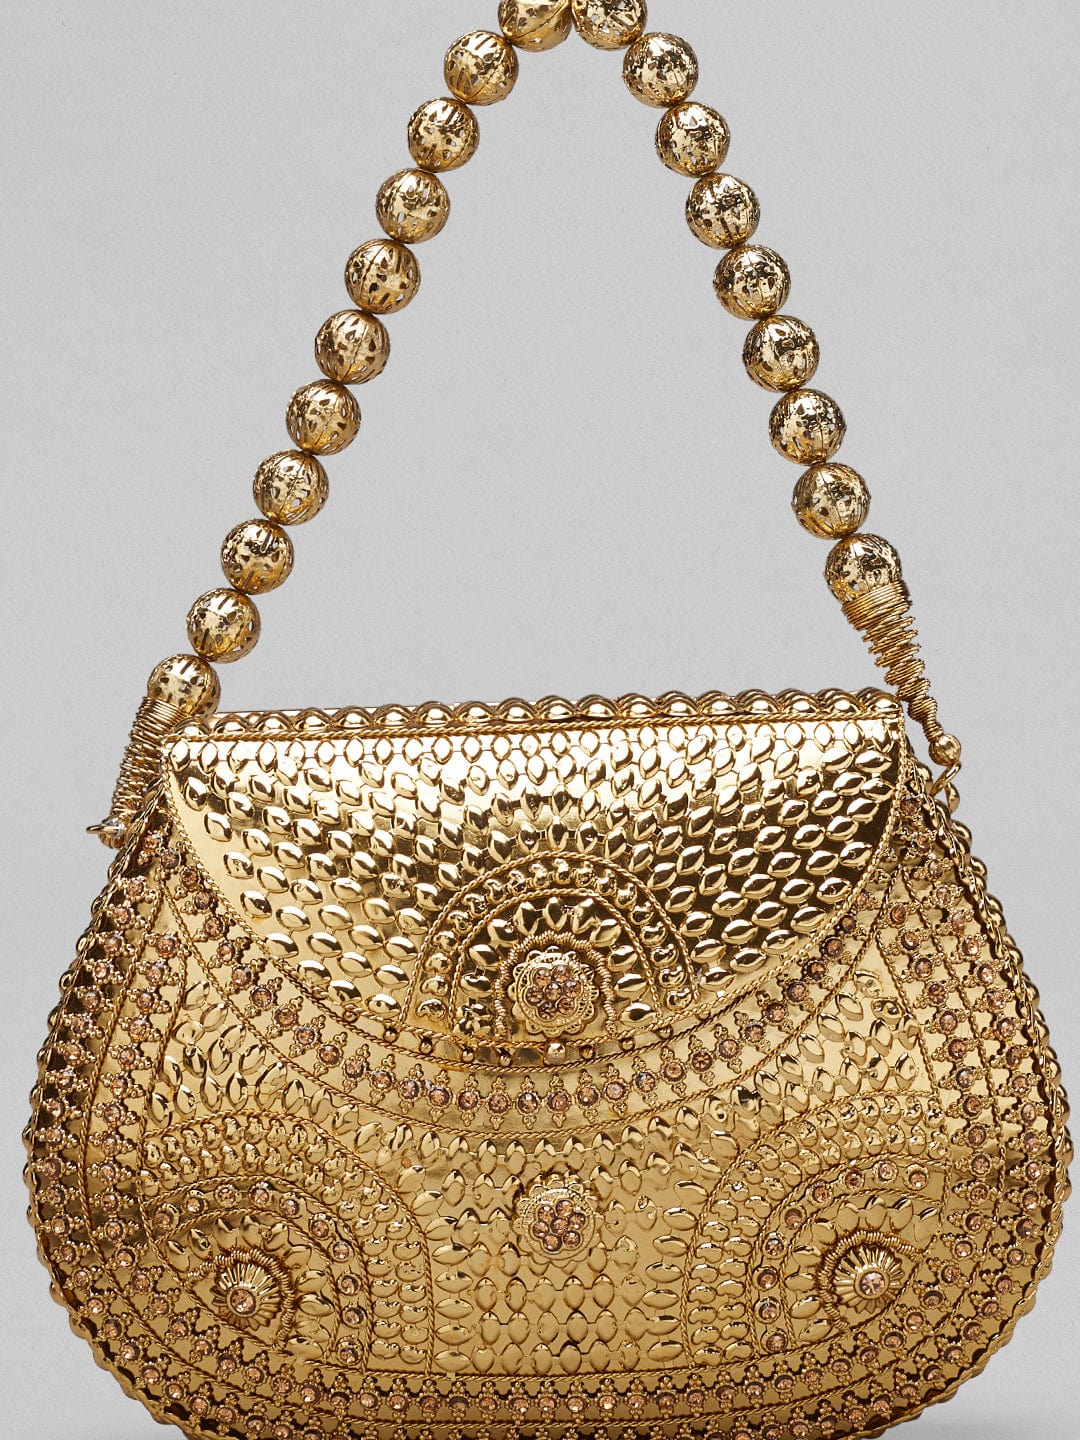 Rubans Golden Coloured Bag With Golden Embroided Design. Clutches